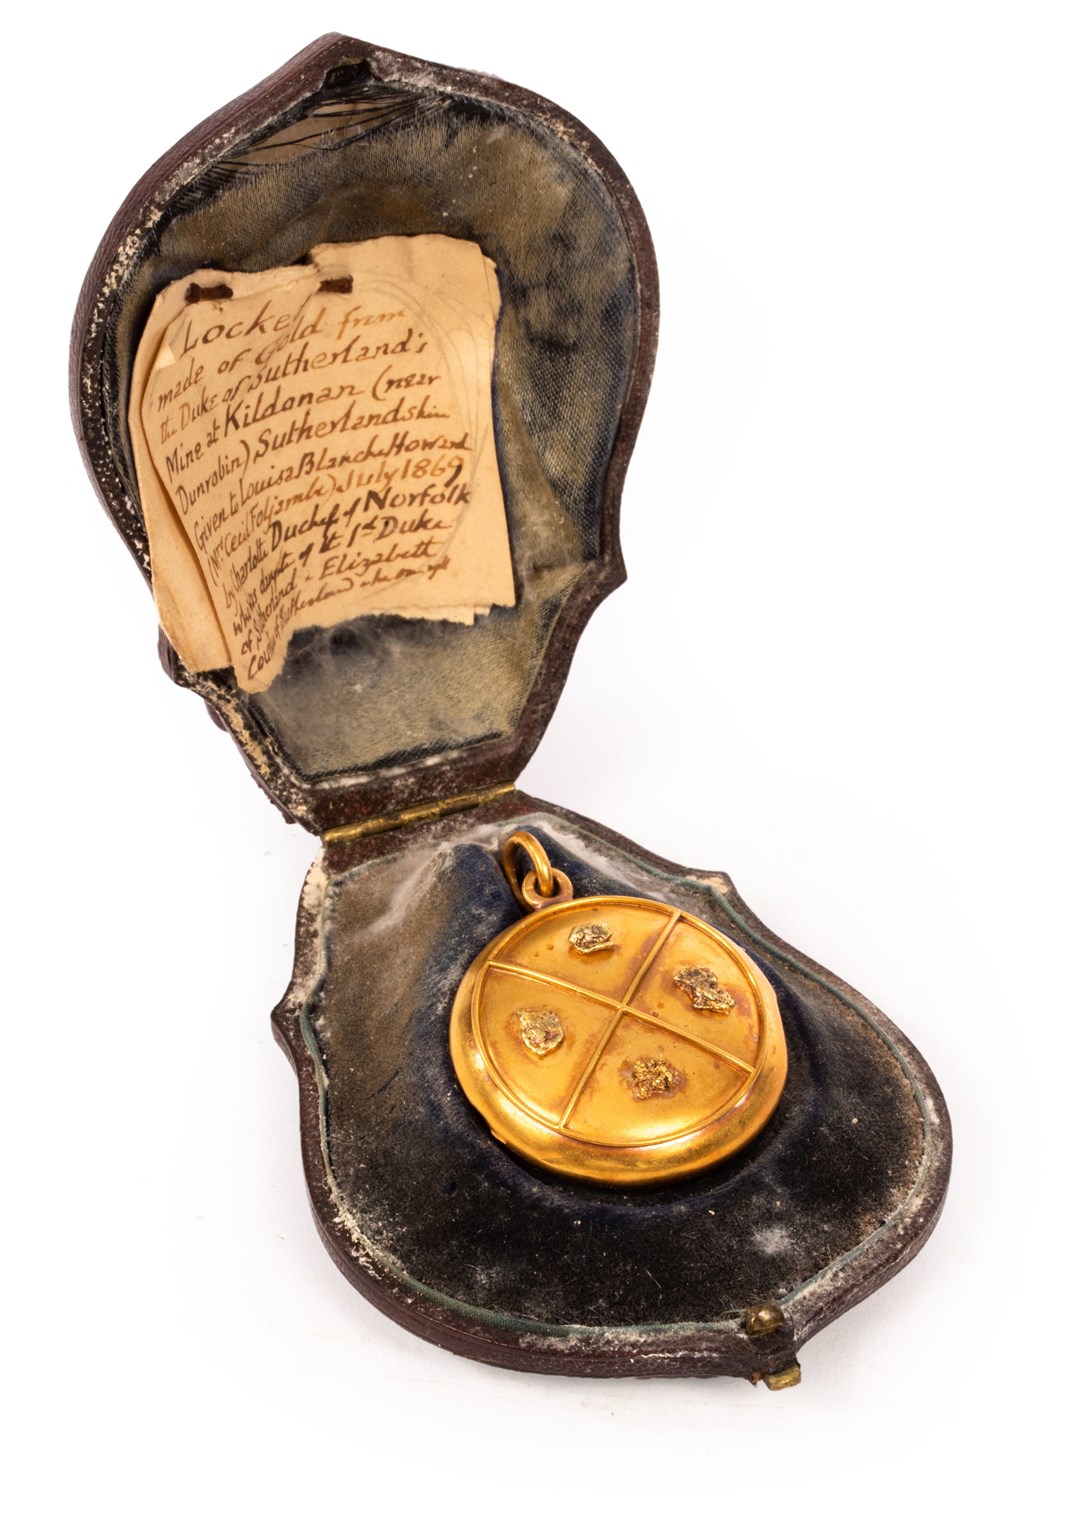 The Victorian locket comes in its own fitted case with a note about its provenance.